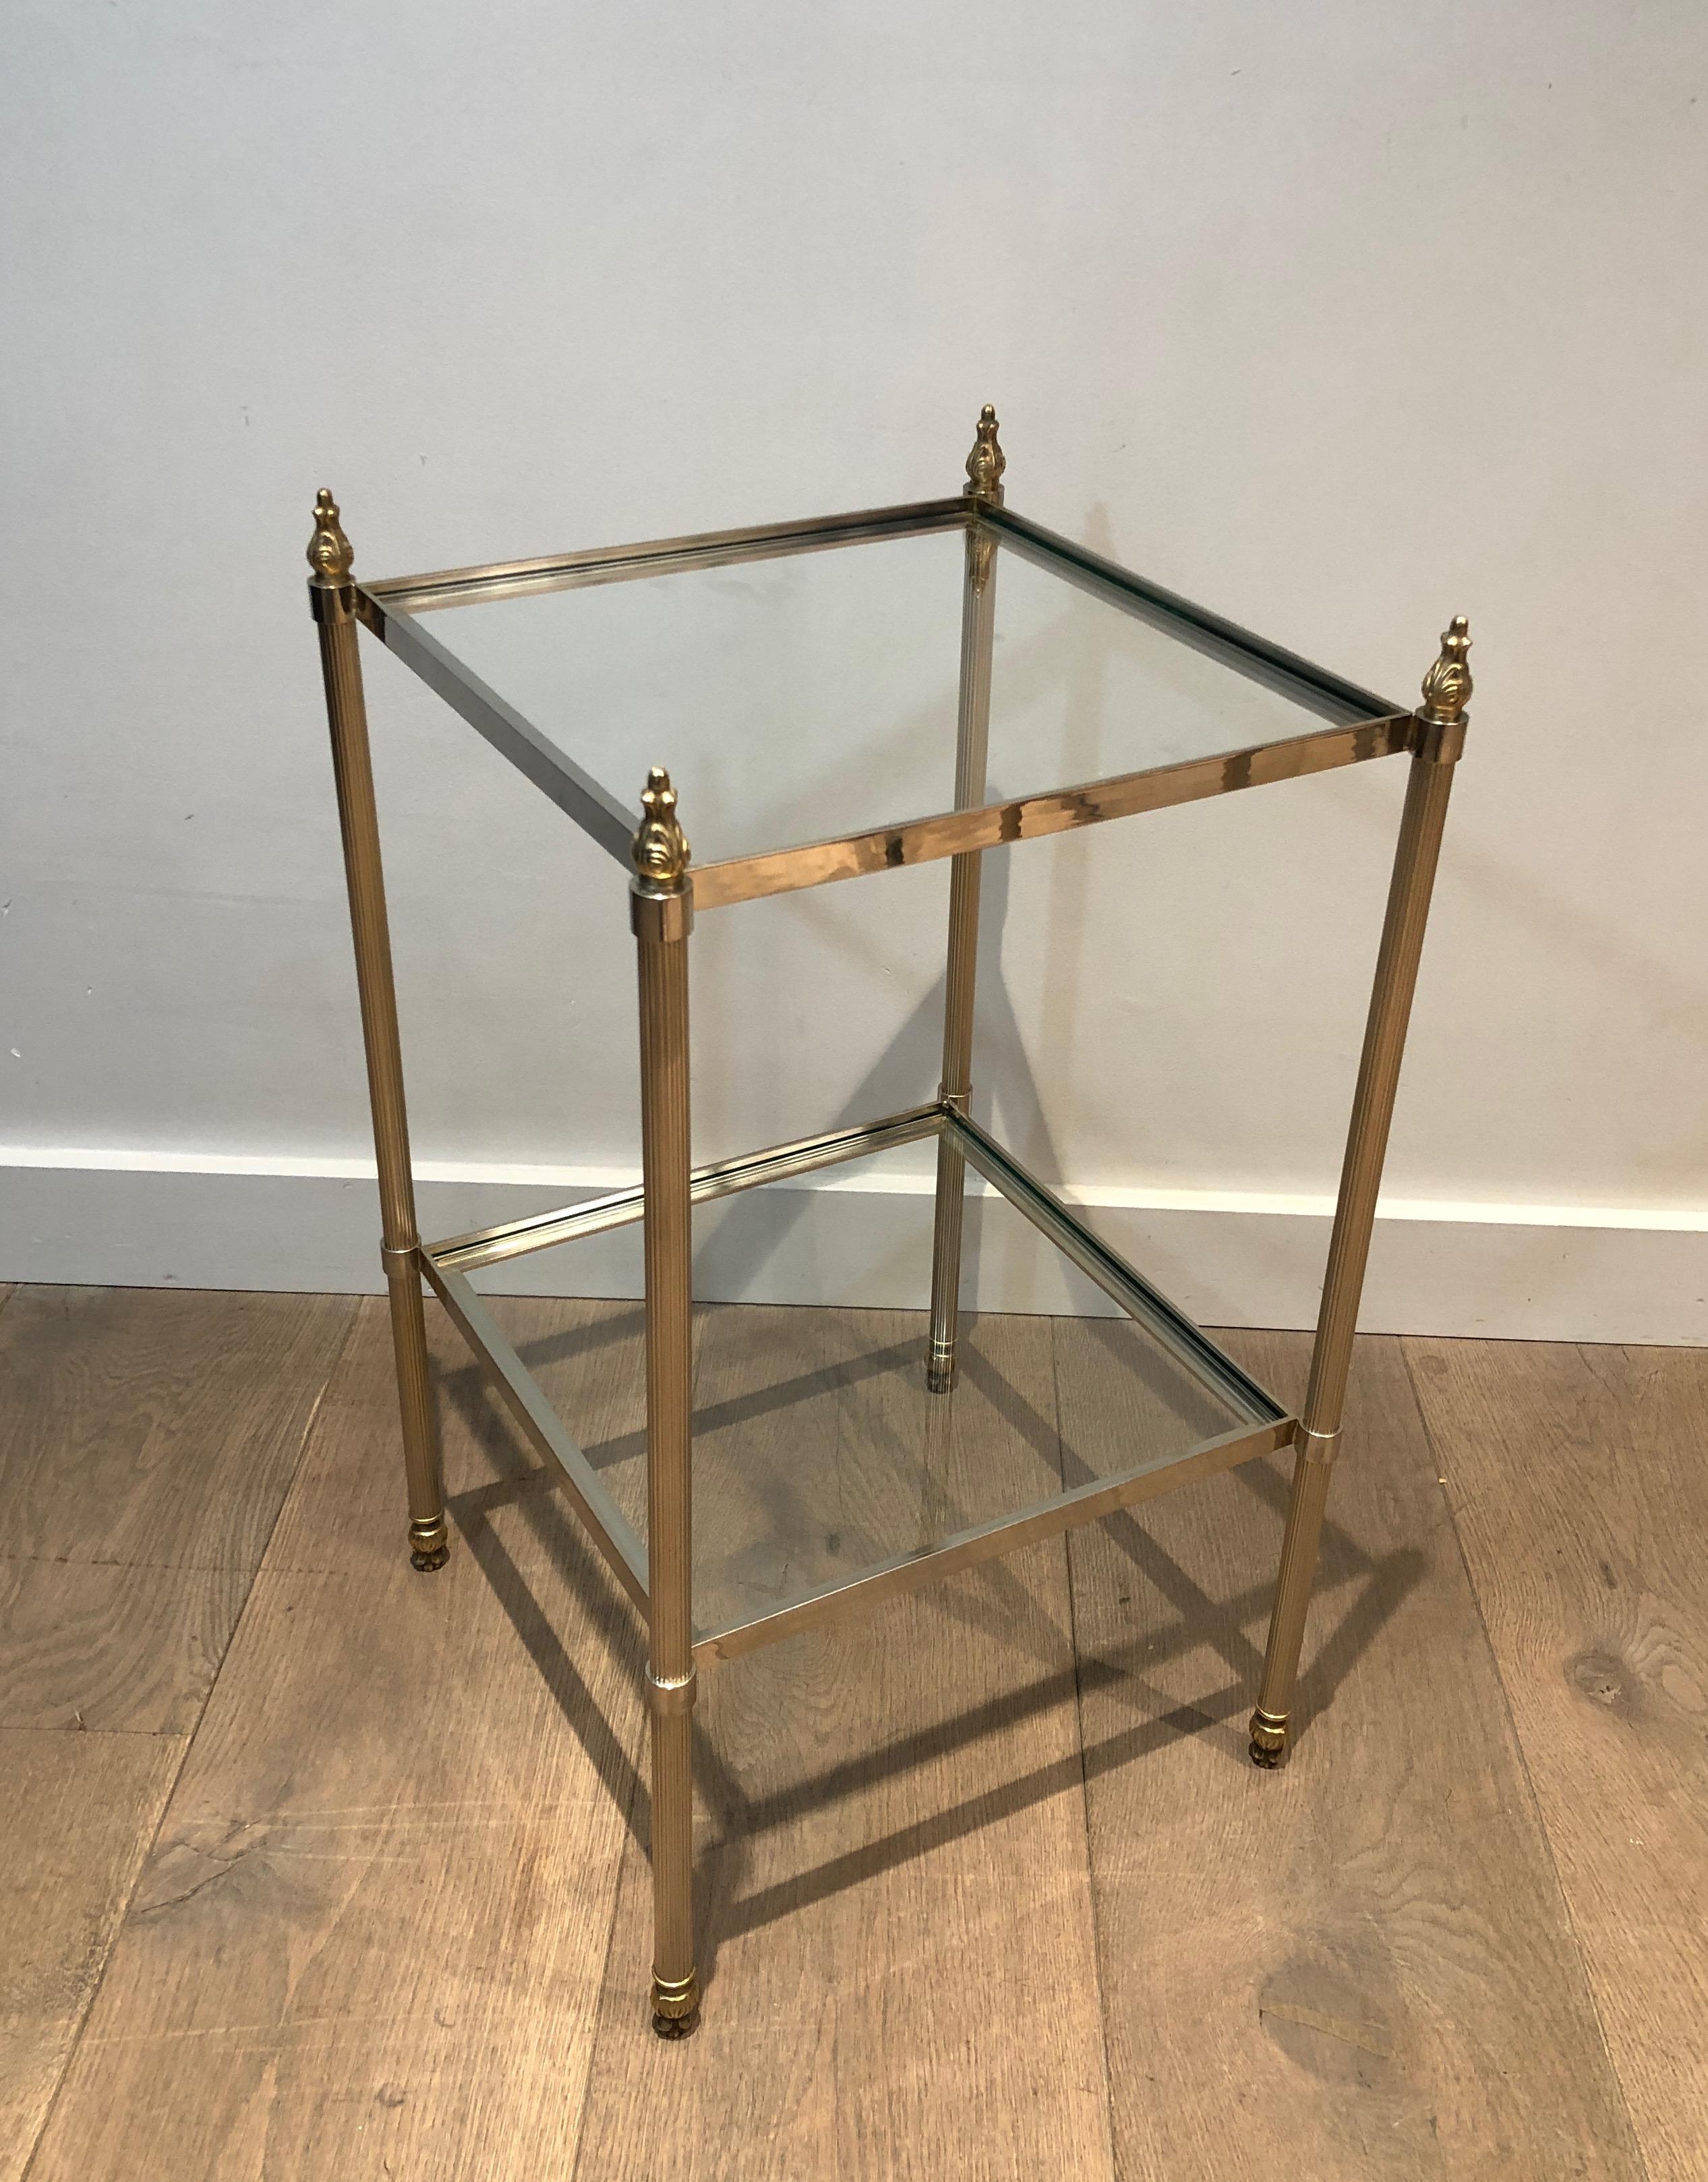 Mid-20th Century Pair of Silver Plated Side Tables with 2 Tiers and Fluted Legs, French Work Attr